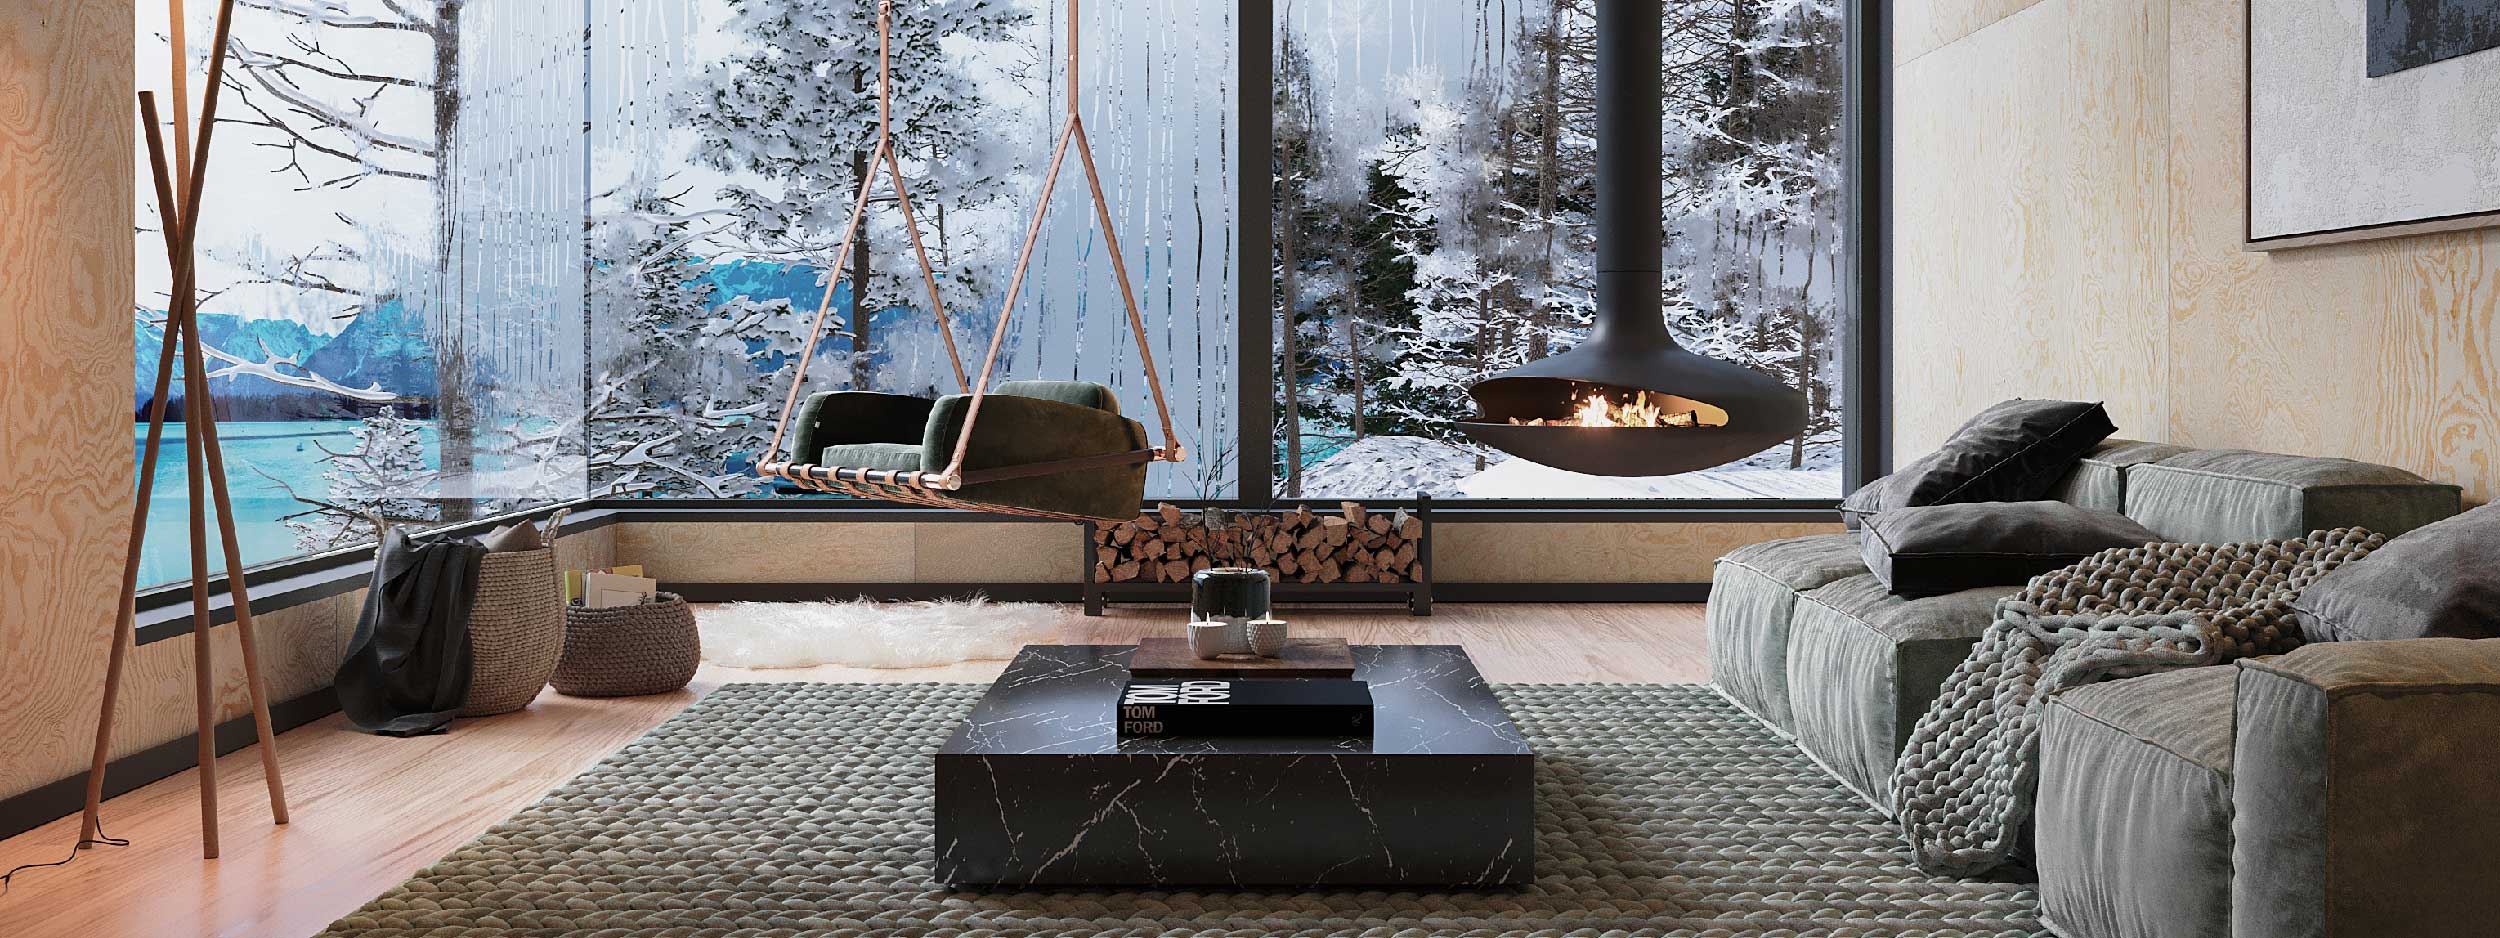 Image of Fable hanging chair inside minimalist dwelling with snow and snow-covered trees in the background